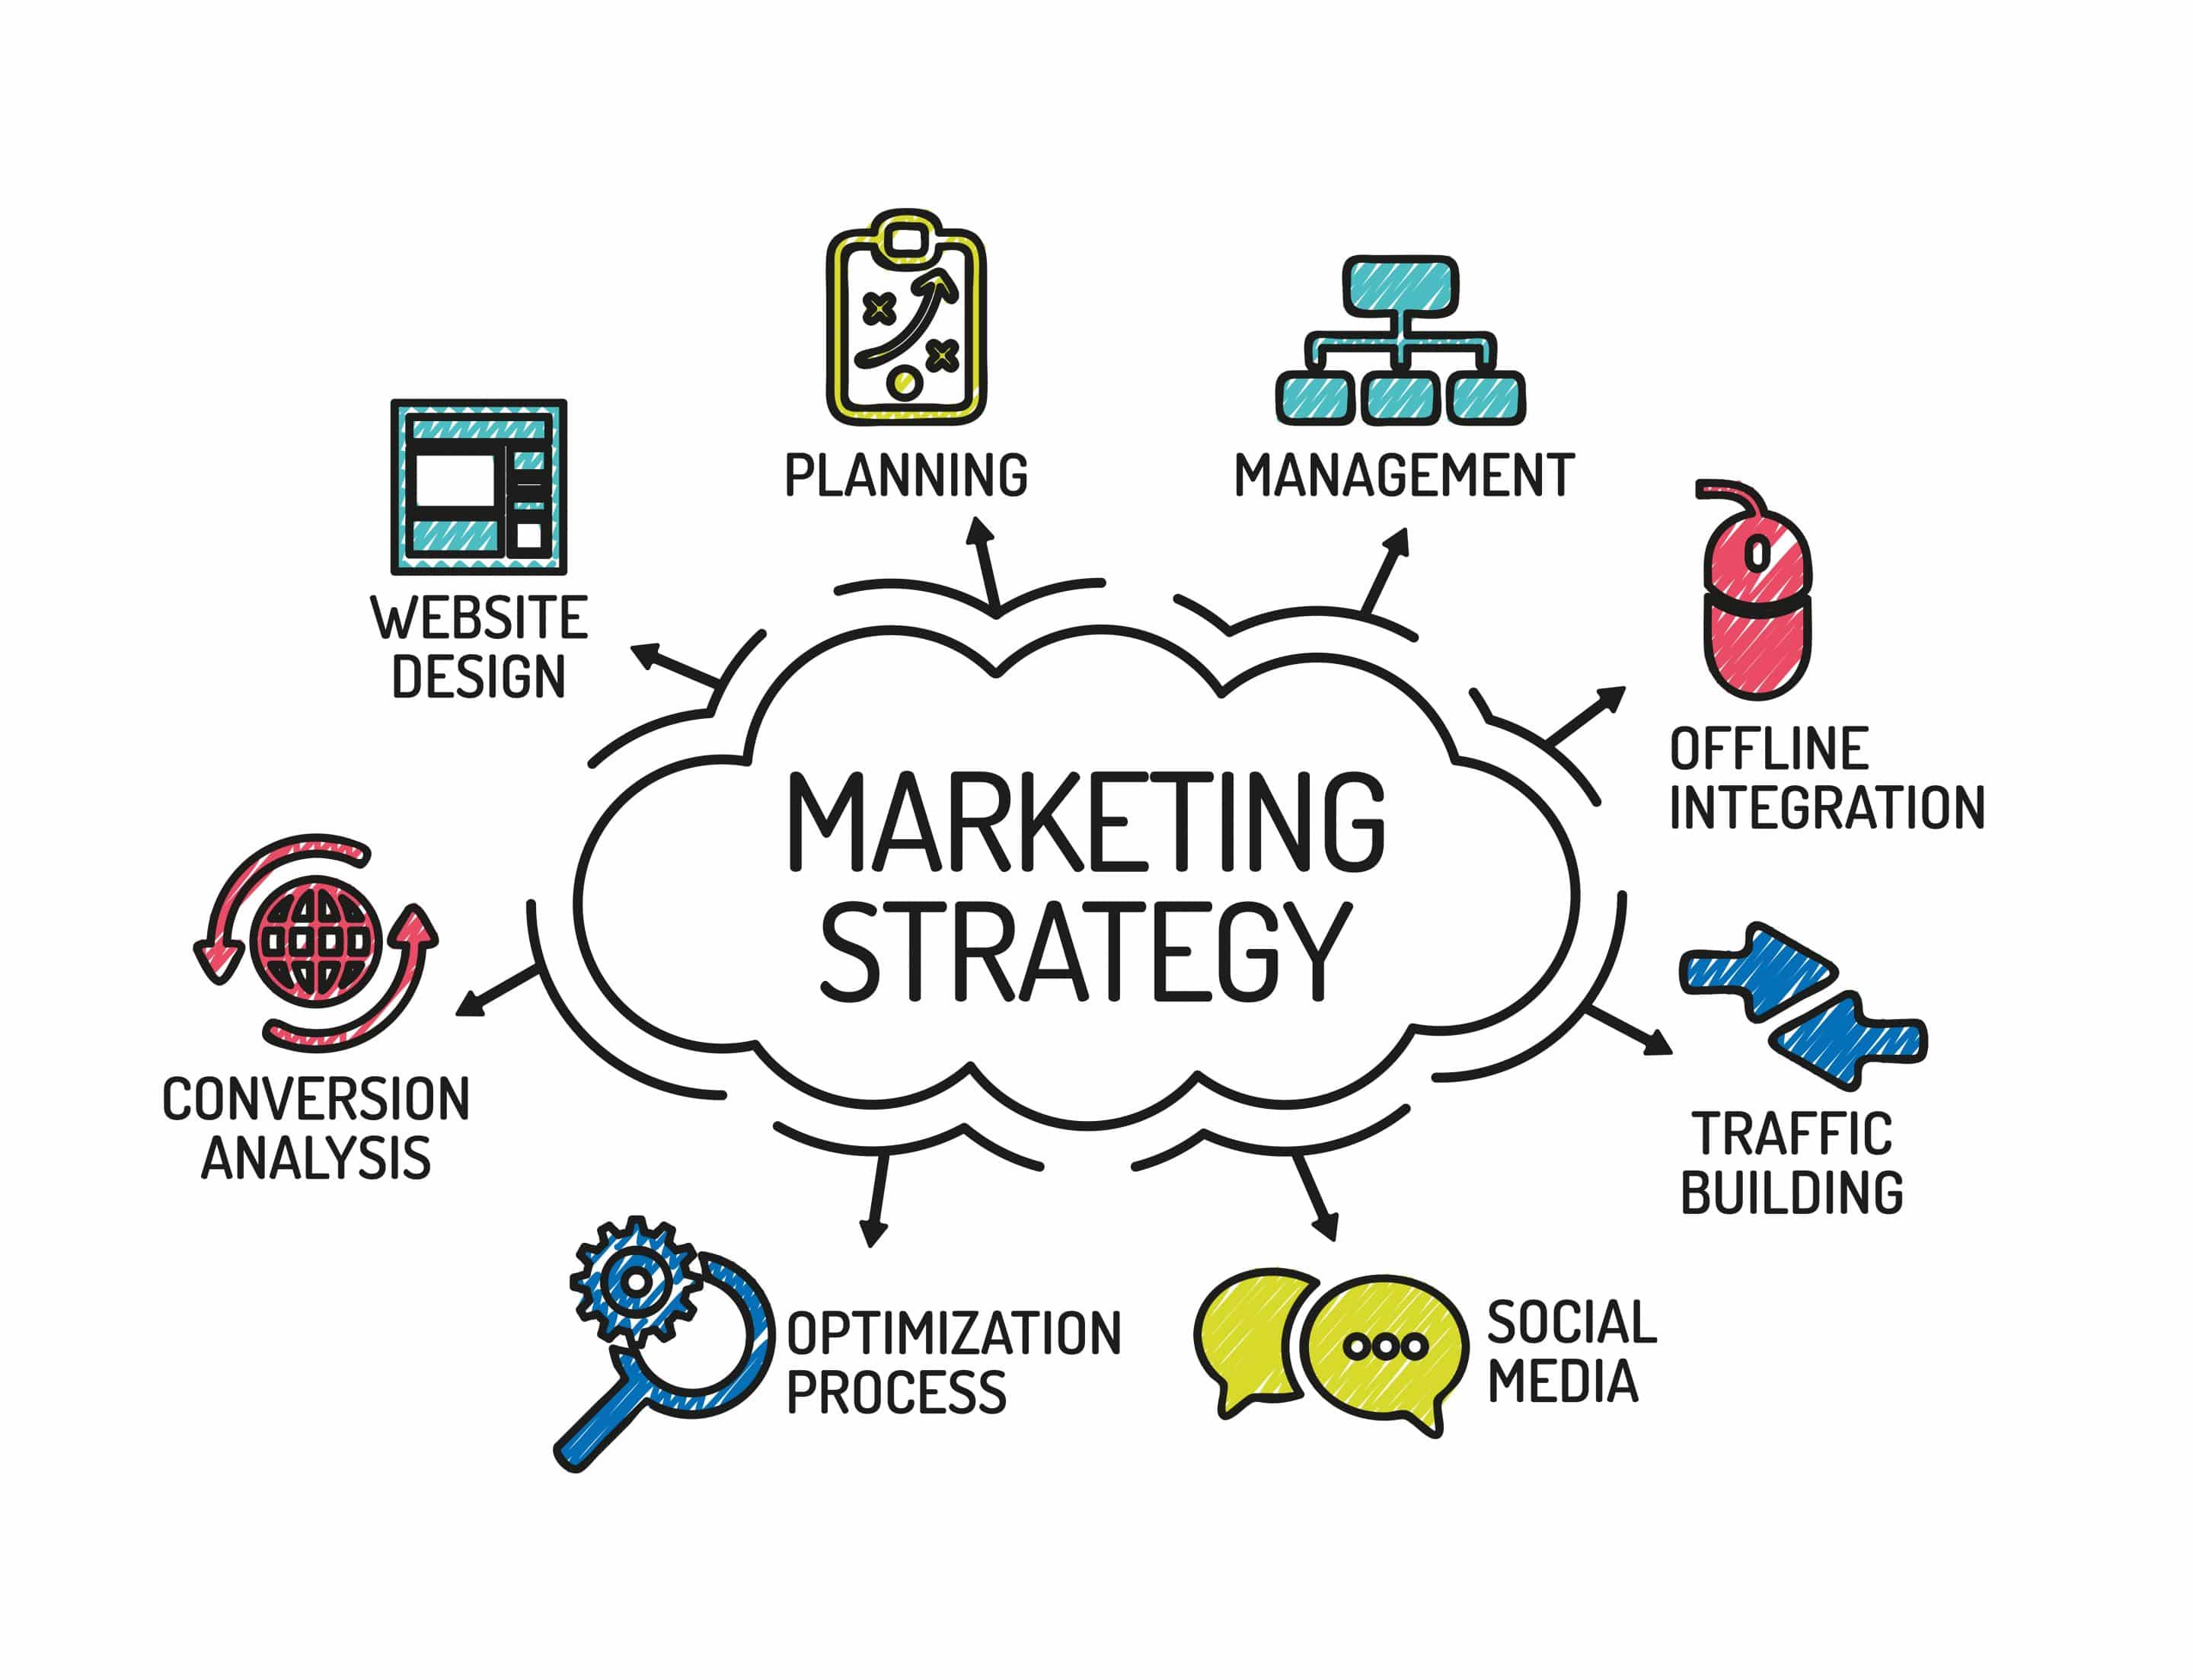  A sketchnote image that shows the components of a marketing strategy in Indonesia, including market research, competitor analysis, target audience identification, marketing mix, and budget allocation.